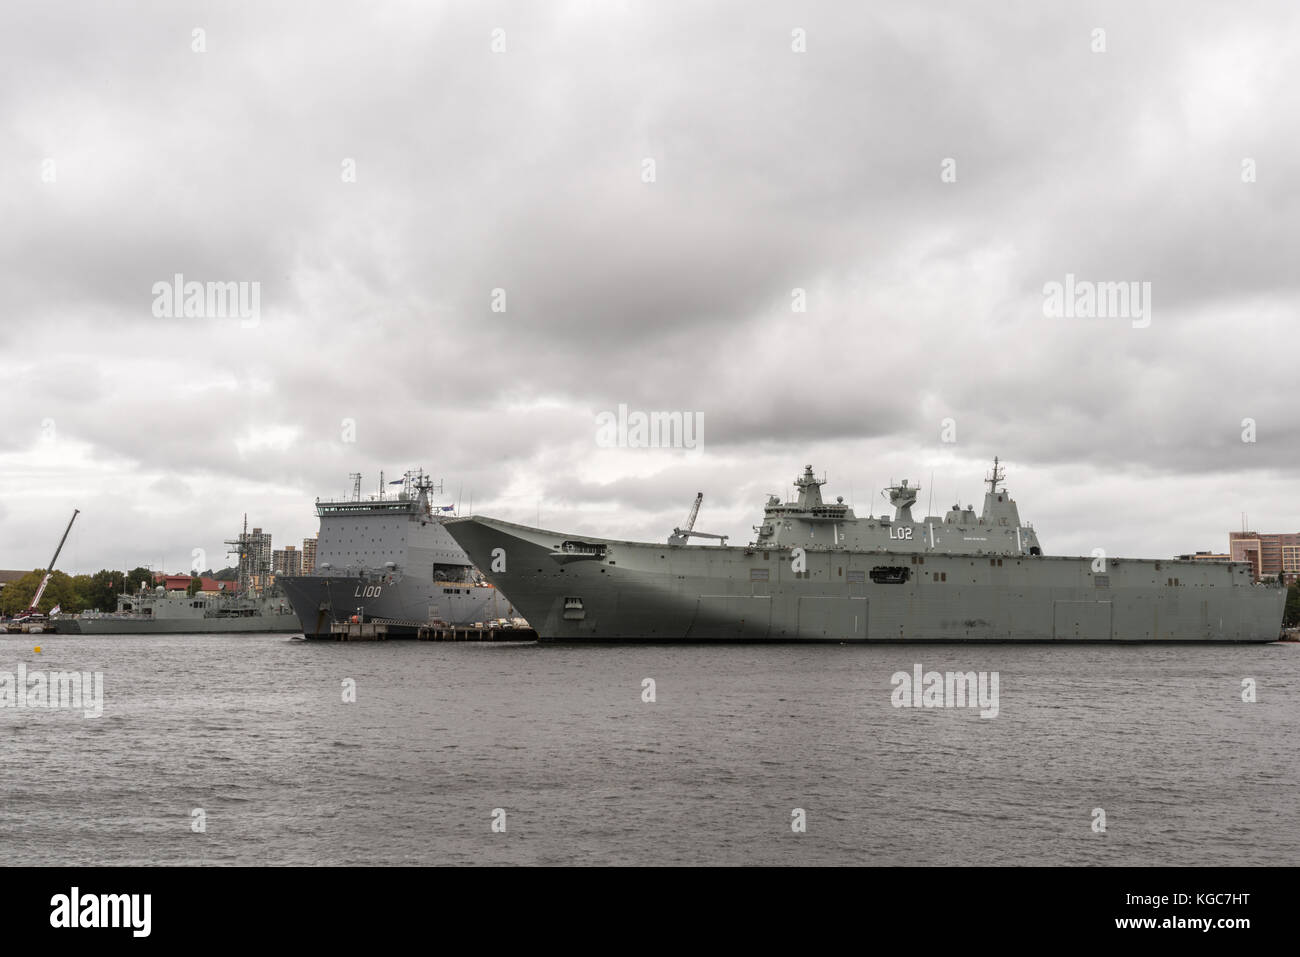 Sydney, Australia - March 23, 2017: L100 Bay Class Landing ship and L1 Landing Helicopter Dock ship are part of the Royal Australian Navy and docked i Stock Photo